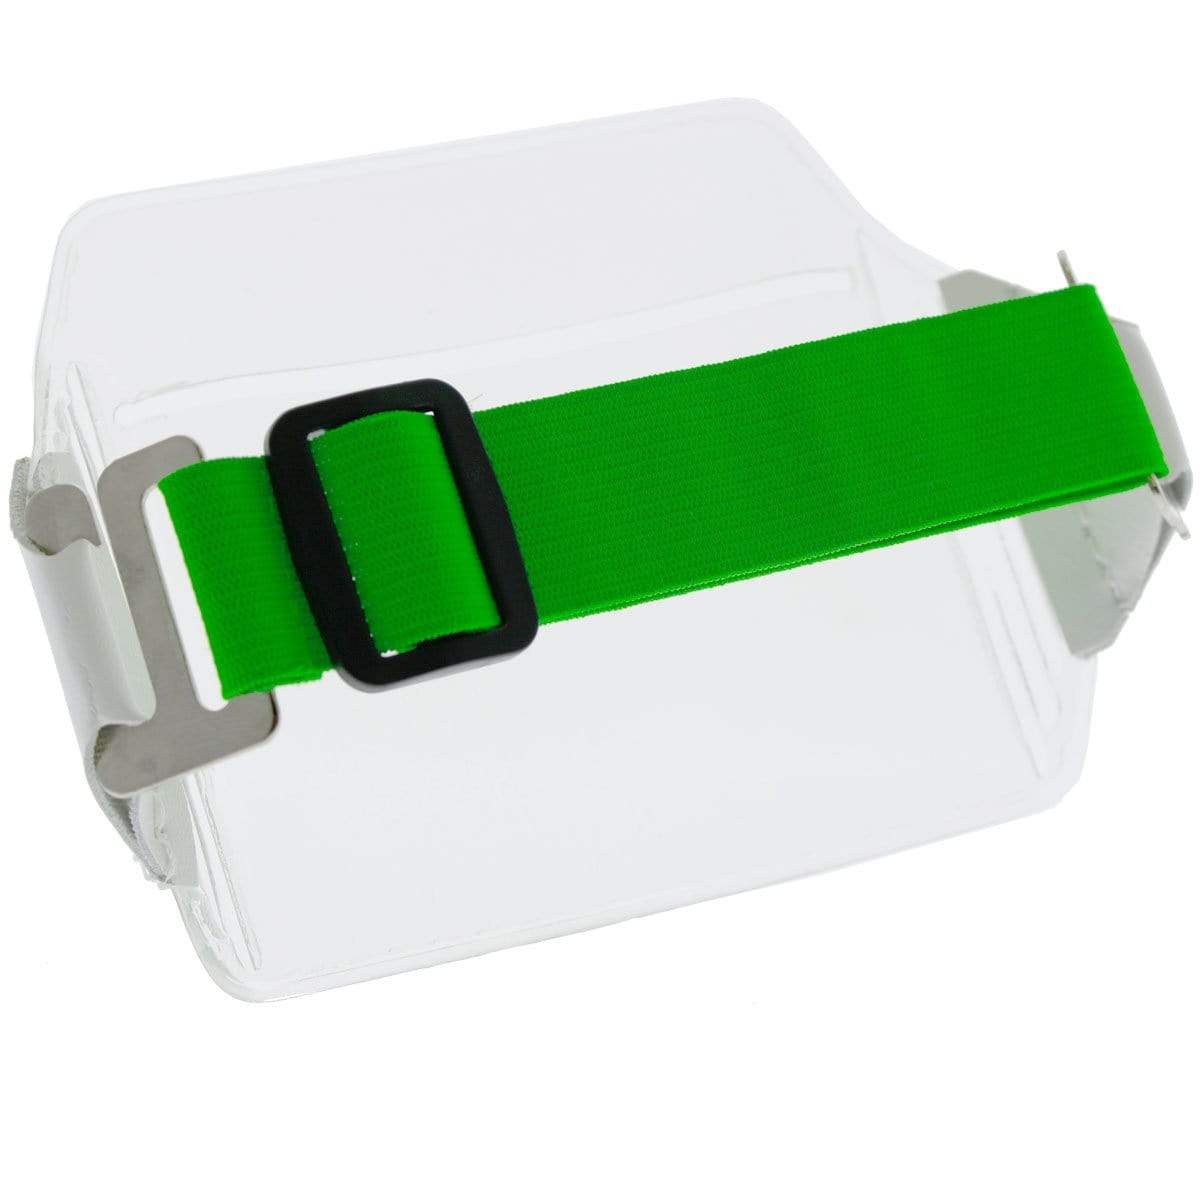 A bright green luggage strap with a rectangular black buckle, secured around a transparent suitcase, resembling the functionality of a Clear Over Size Vinyl Horizontal Arm Band Badge Holder (P/N 1840-7100).